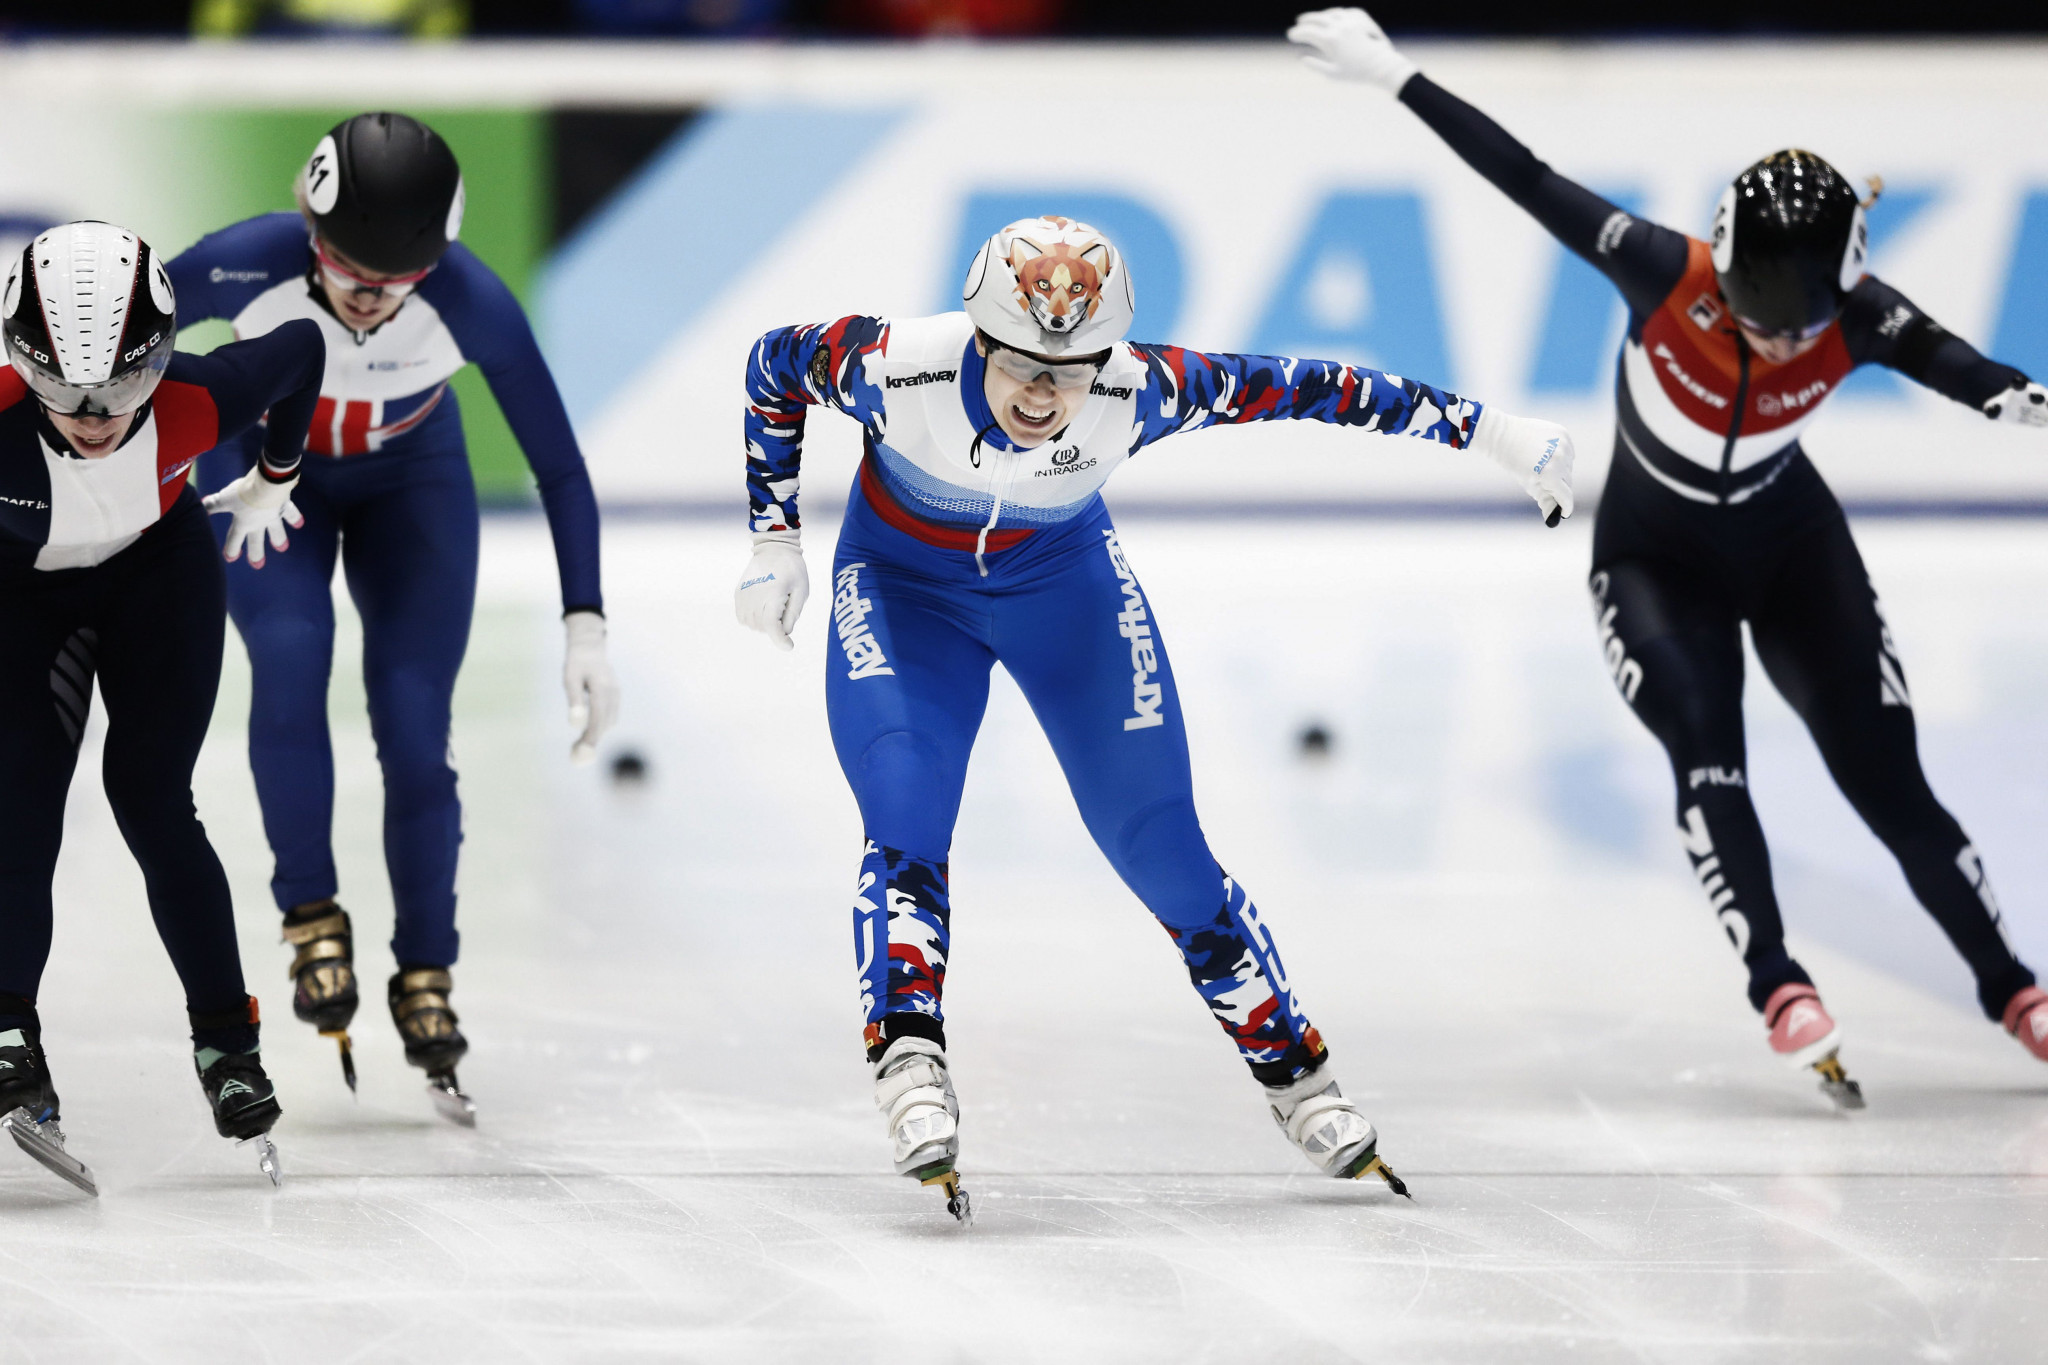 Russia's Sofia Prosvirnova, centre, was the only non-Korean to win a gold medal at the ISU Short Track Speed Skating World Cup in Dresden today ©Getty Images